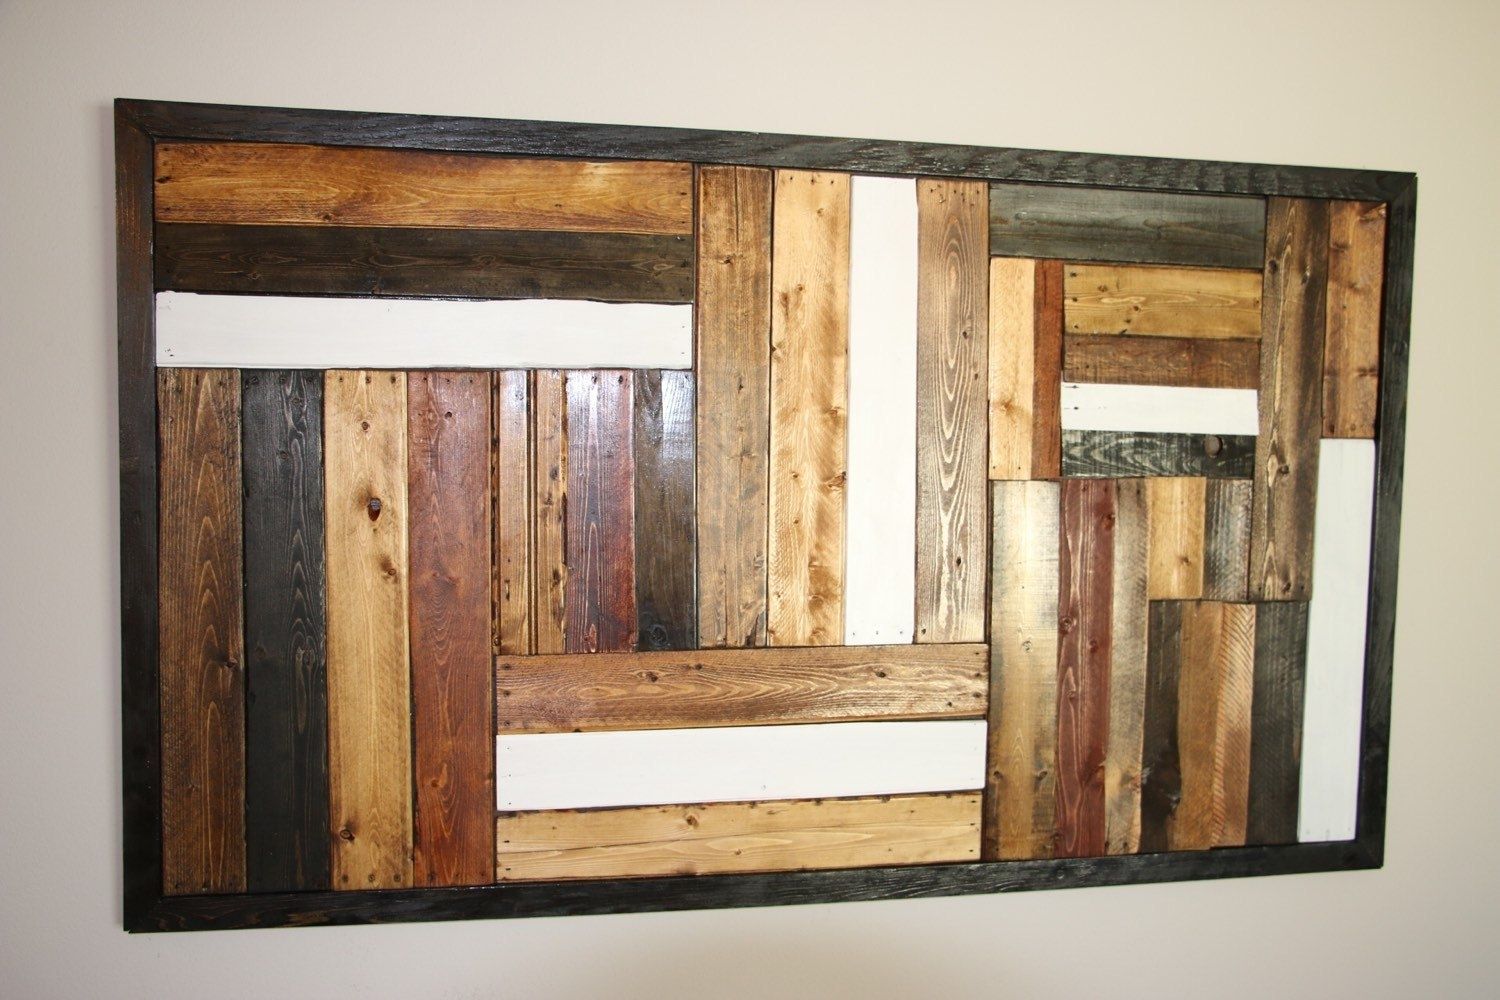 Recycled Pallet Wall Art Pallet Furniture Plans, Pallet Wall Art With Regard To Pallet Wall Art (View 8 of 20)